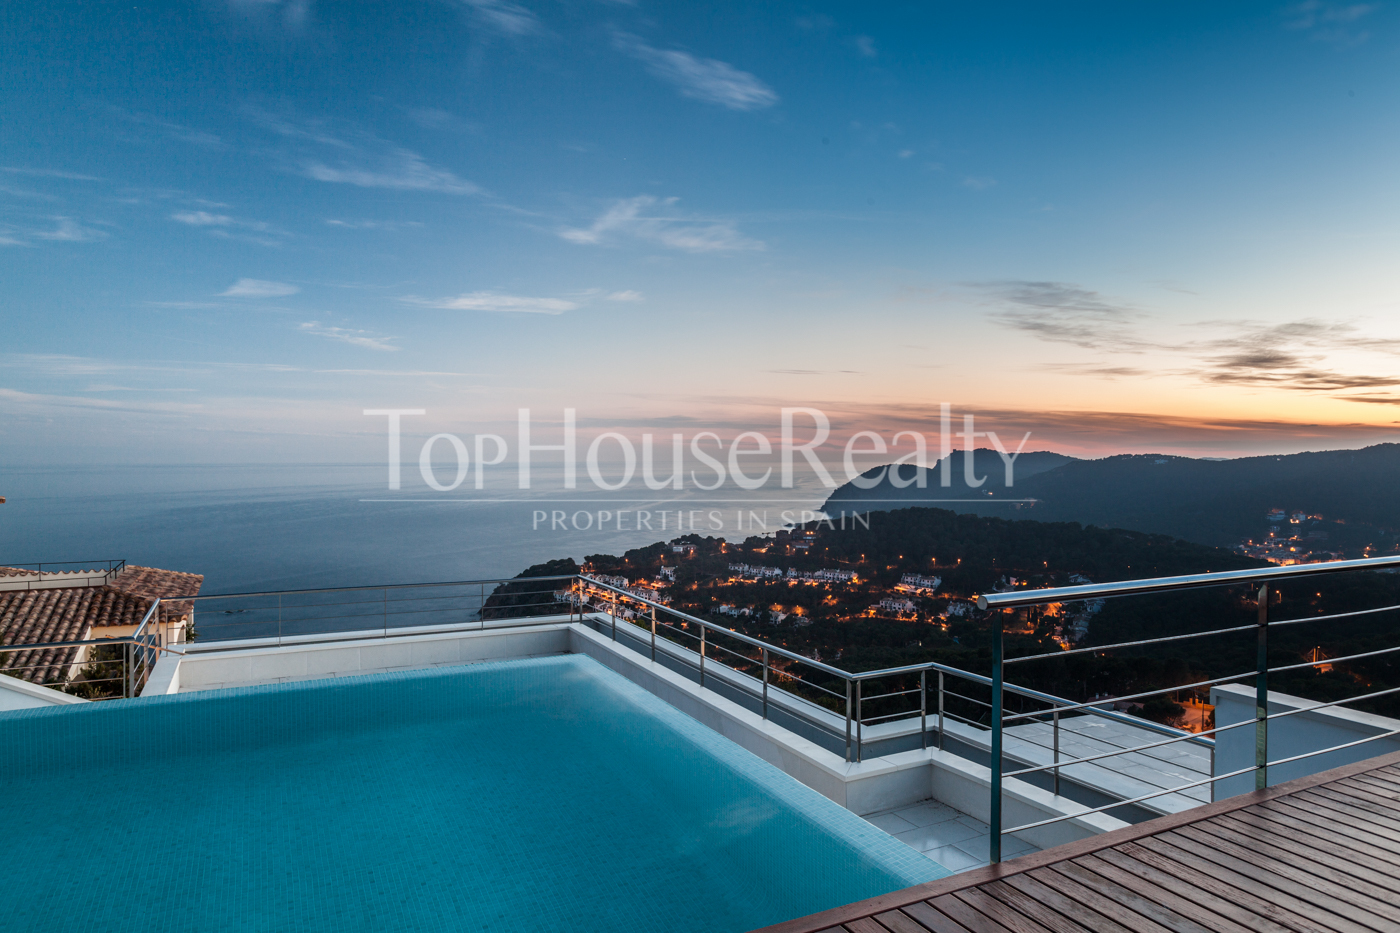 Spectacular modern house with incredible views in Begur